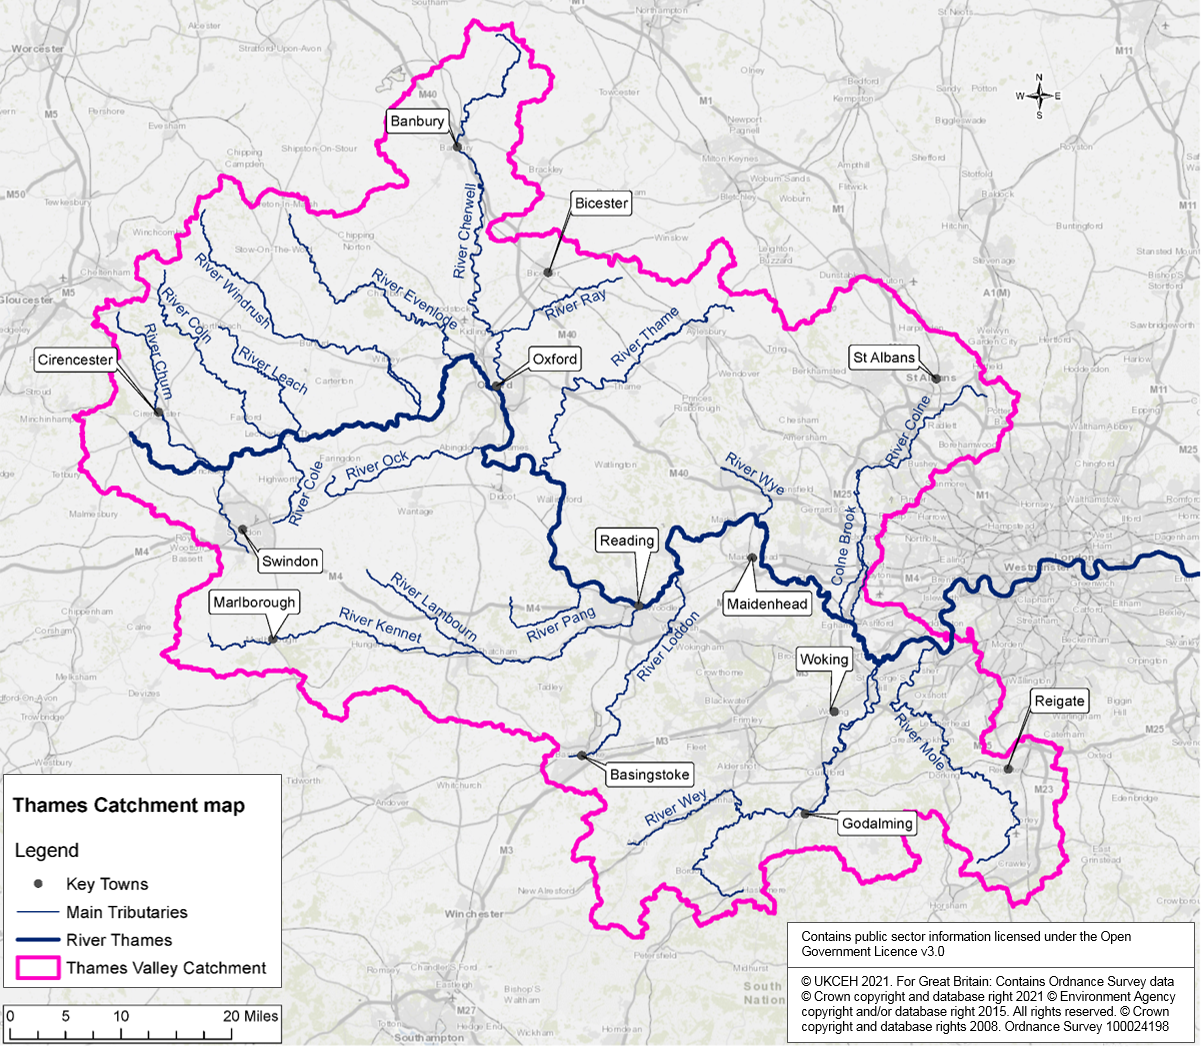 Map of Thames catchment area